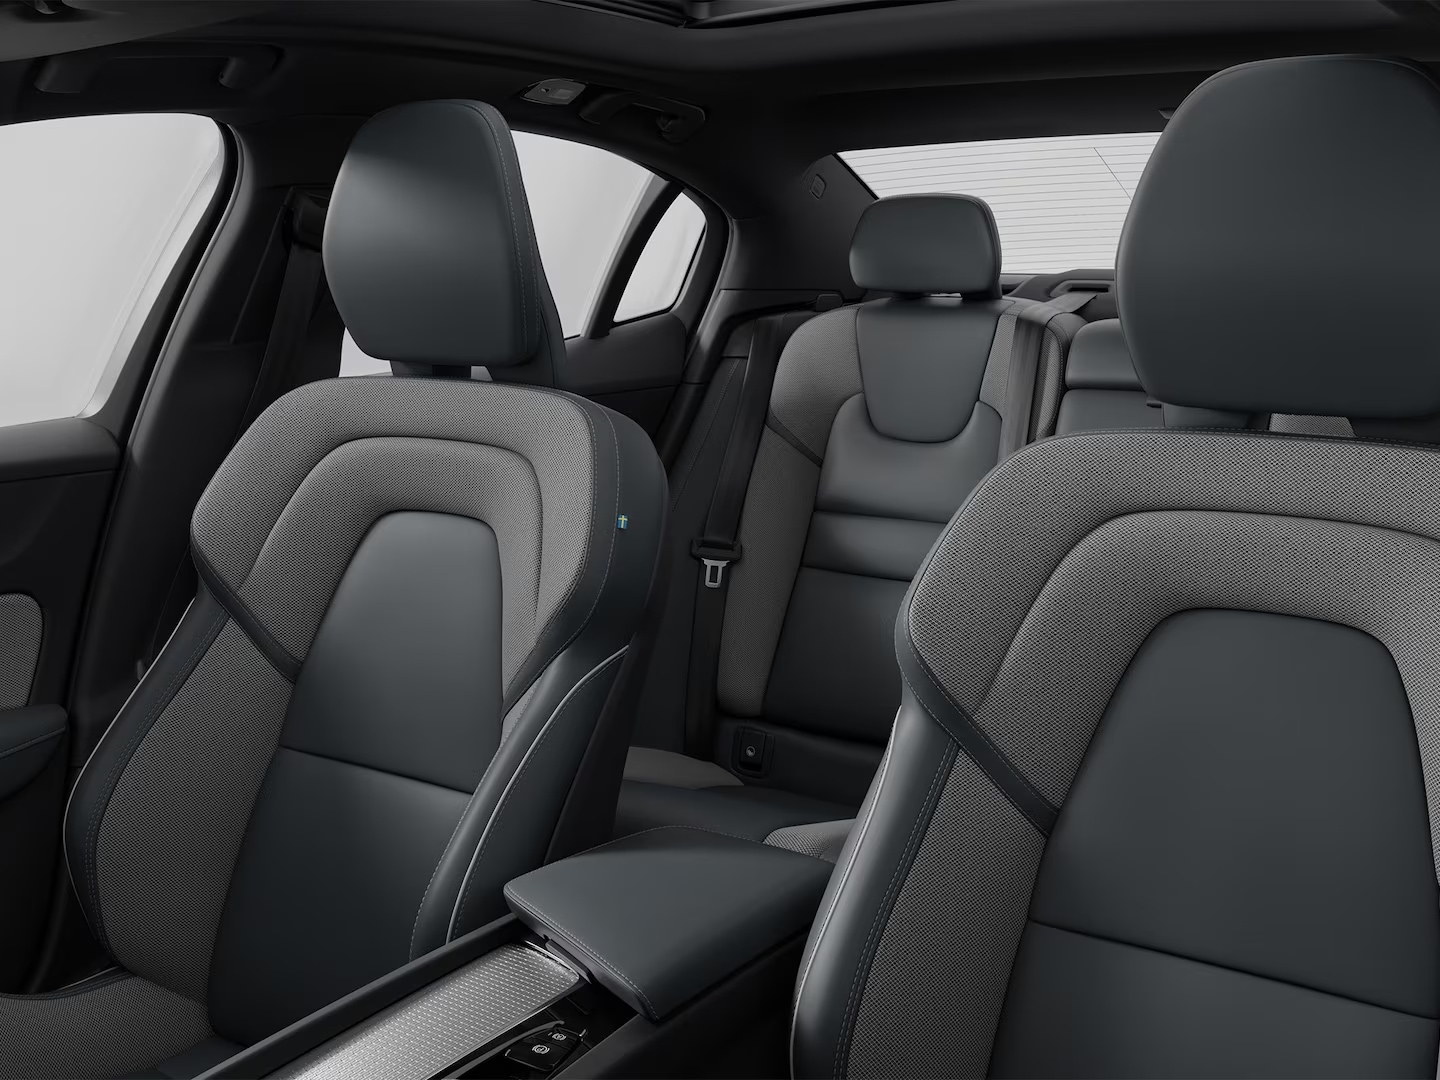 All five dark gray leather and textile seats in the Volvo S60 mild hybrid.